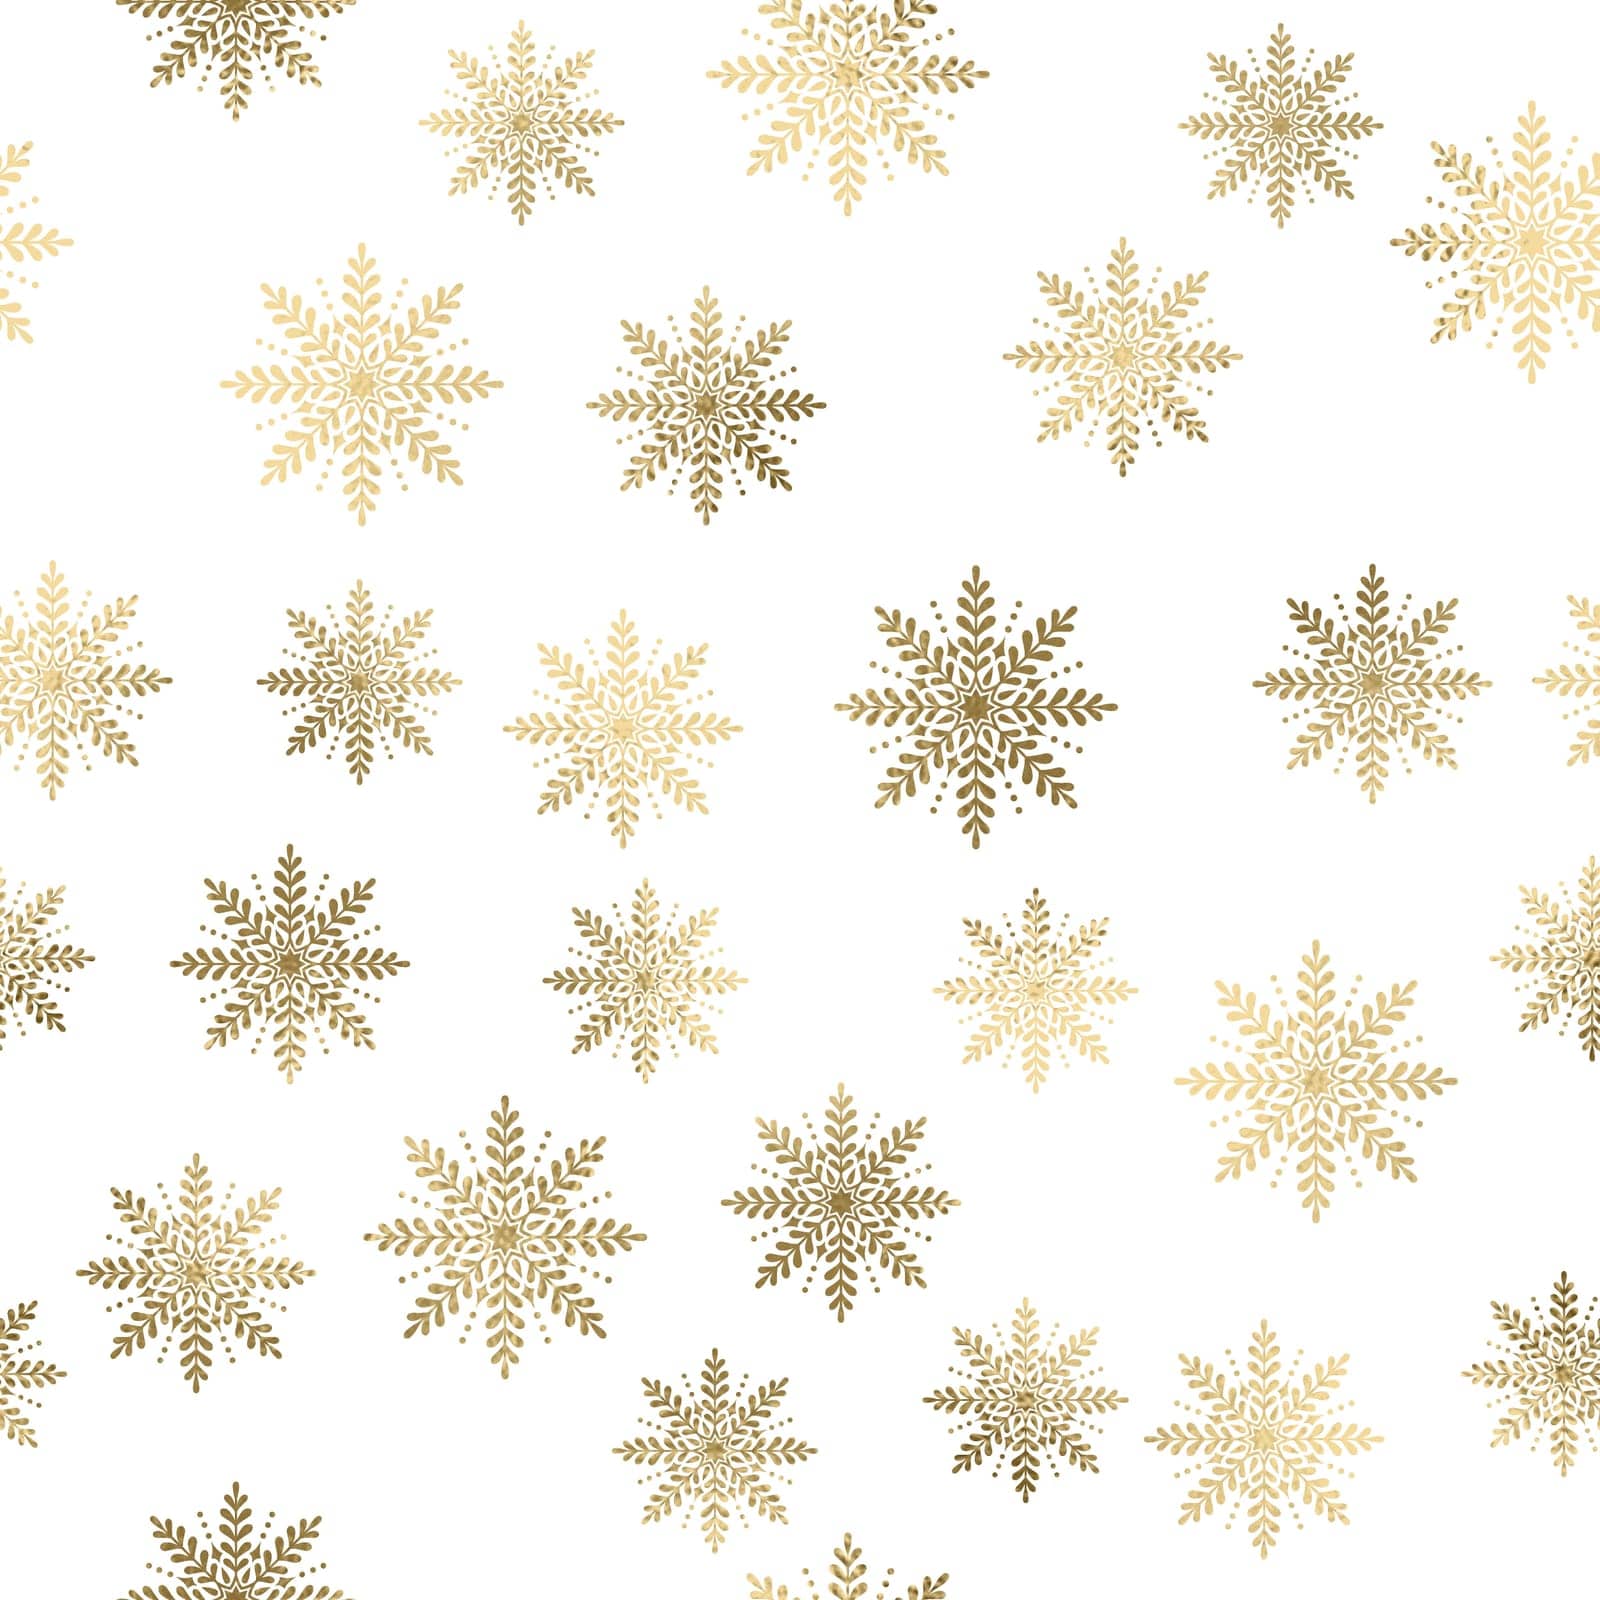 Golden snowflakes over layer transparent background